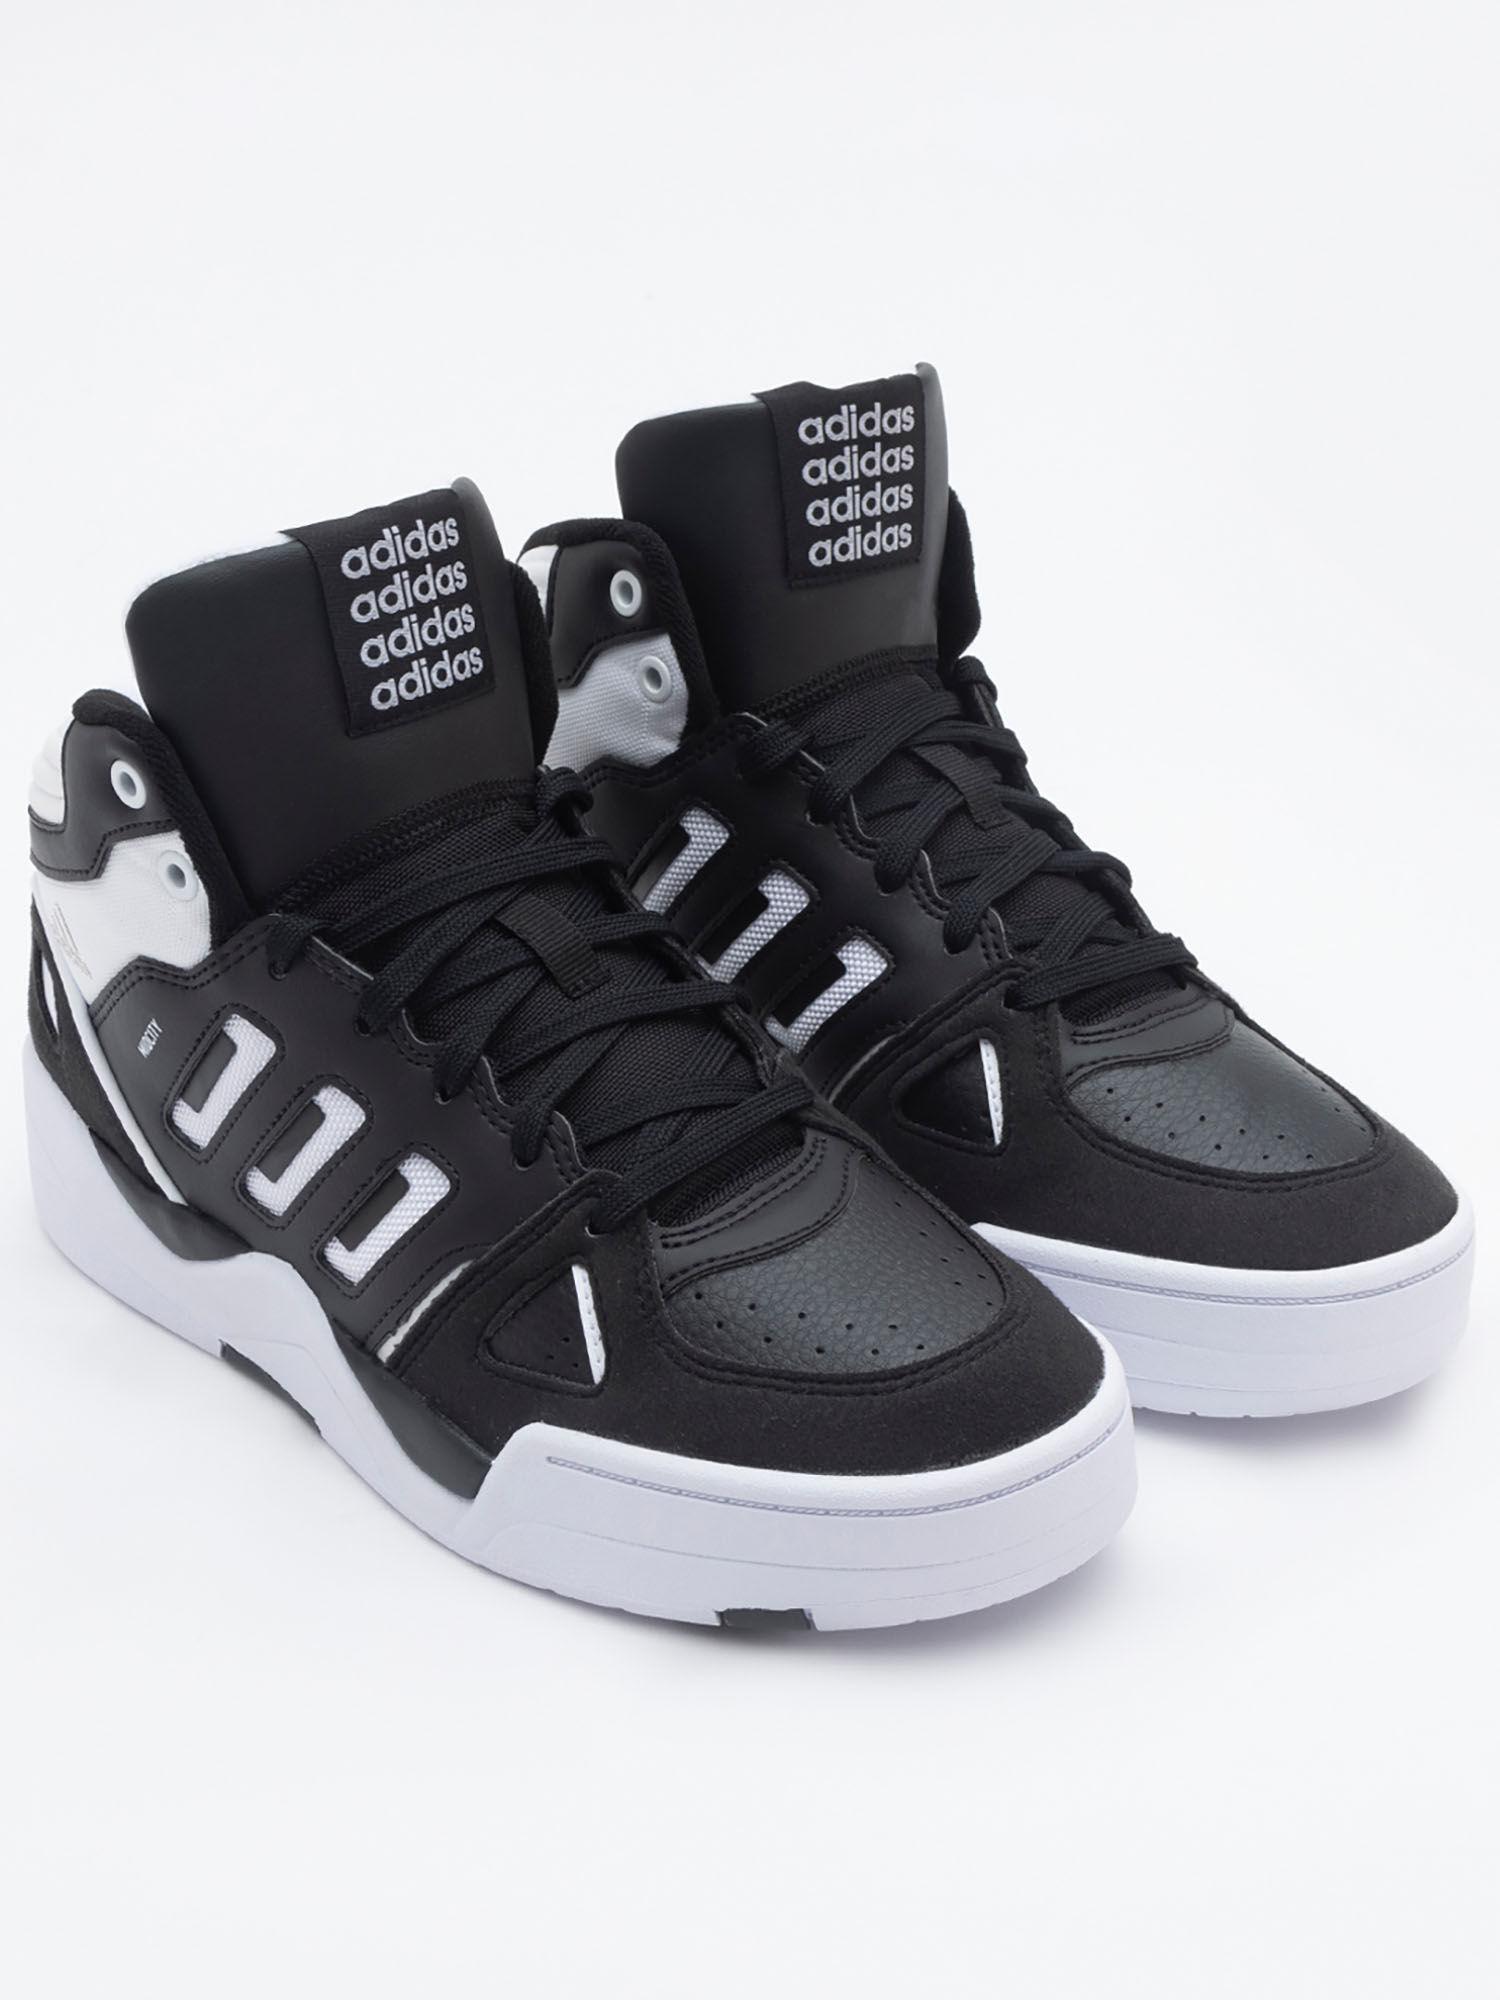 midcity-mid-basketball-shoes-black